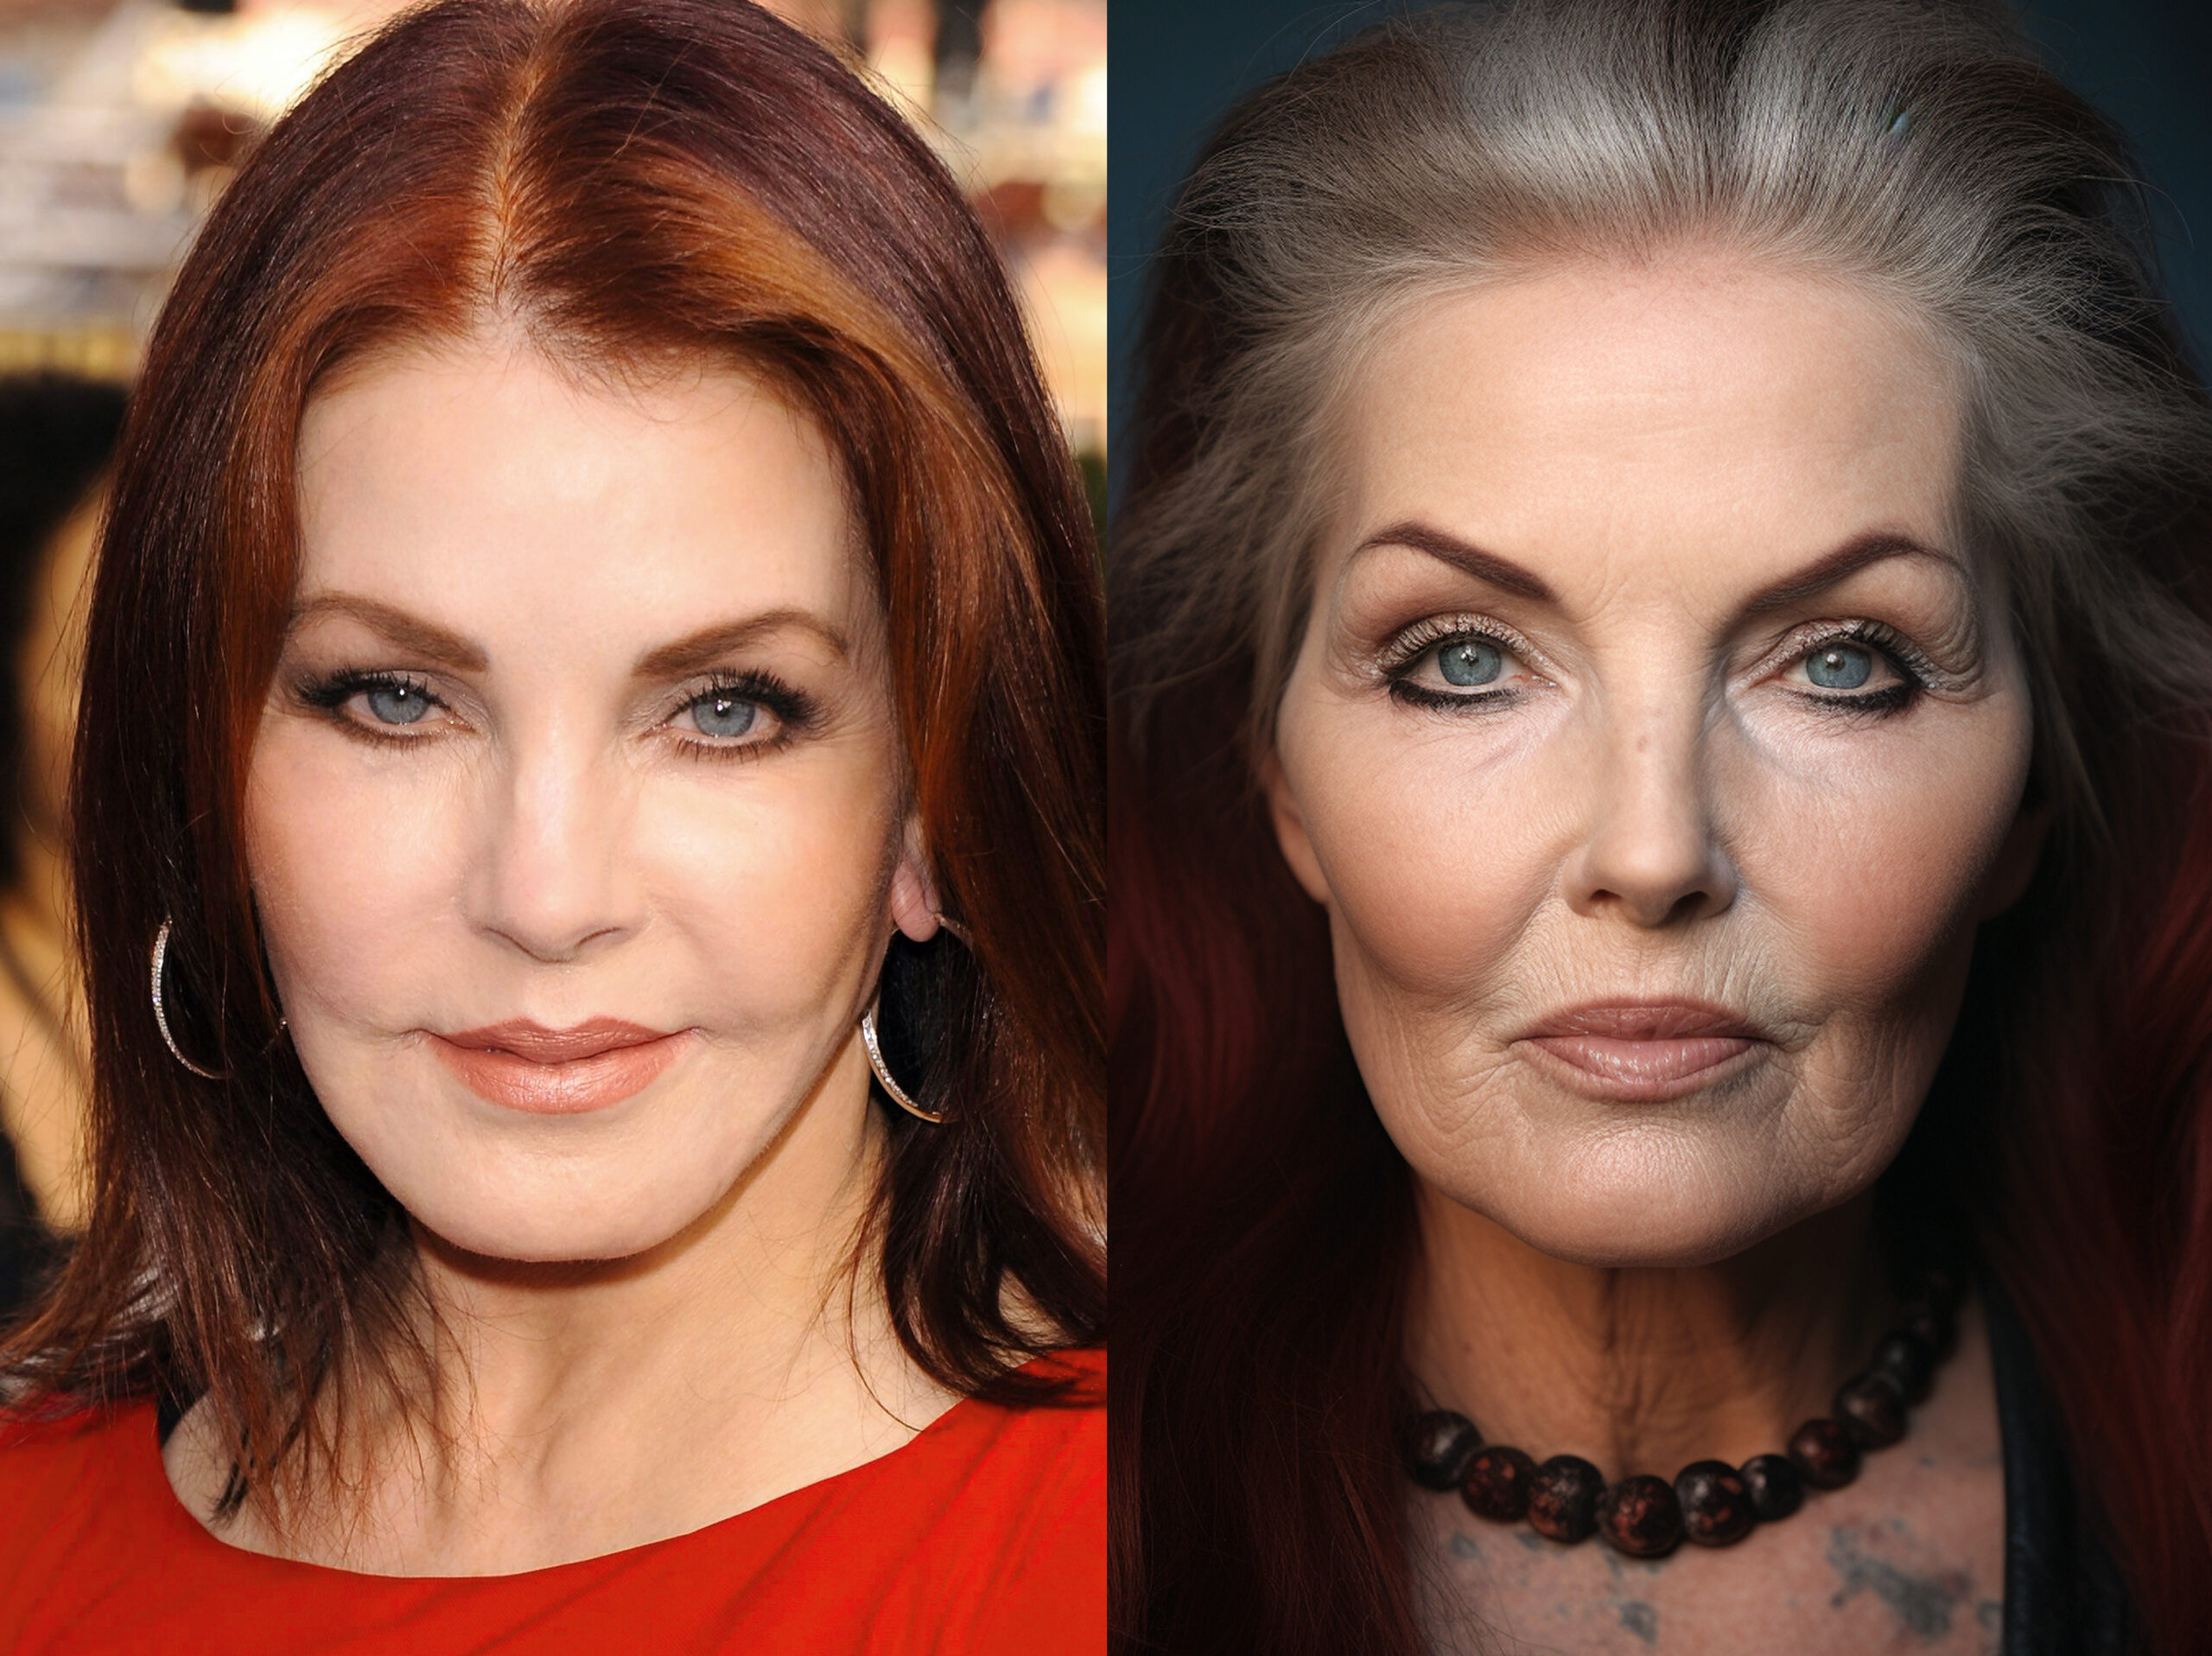 How Priscilla Presley would have looked according to an AI-generated image | Source: Midjourney